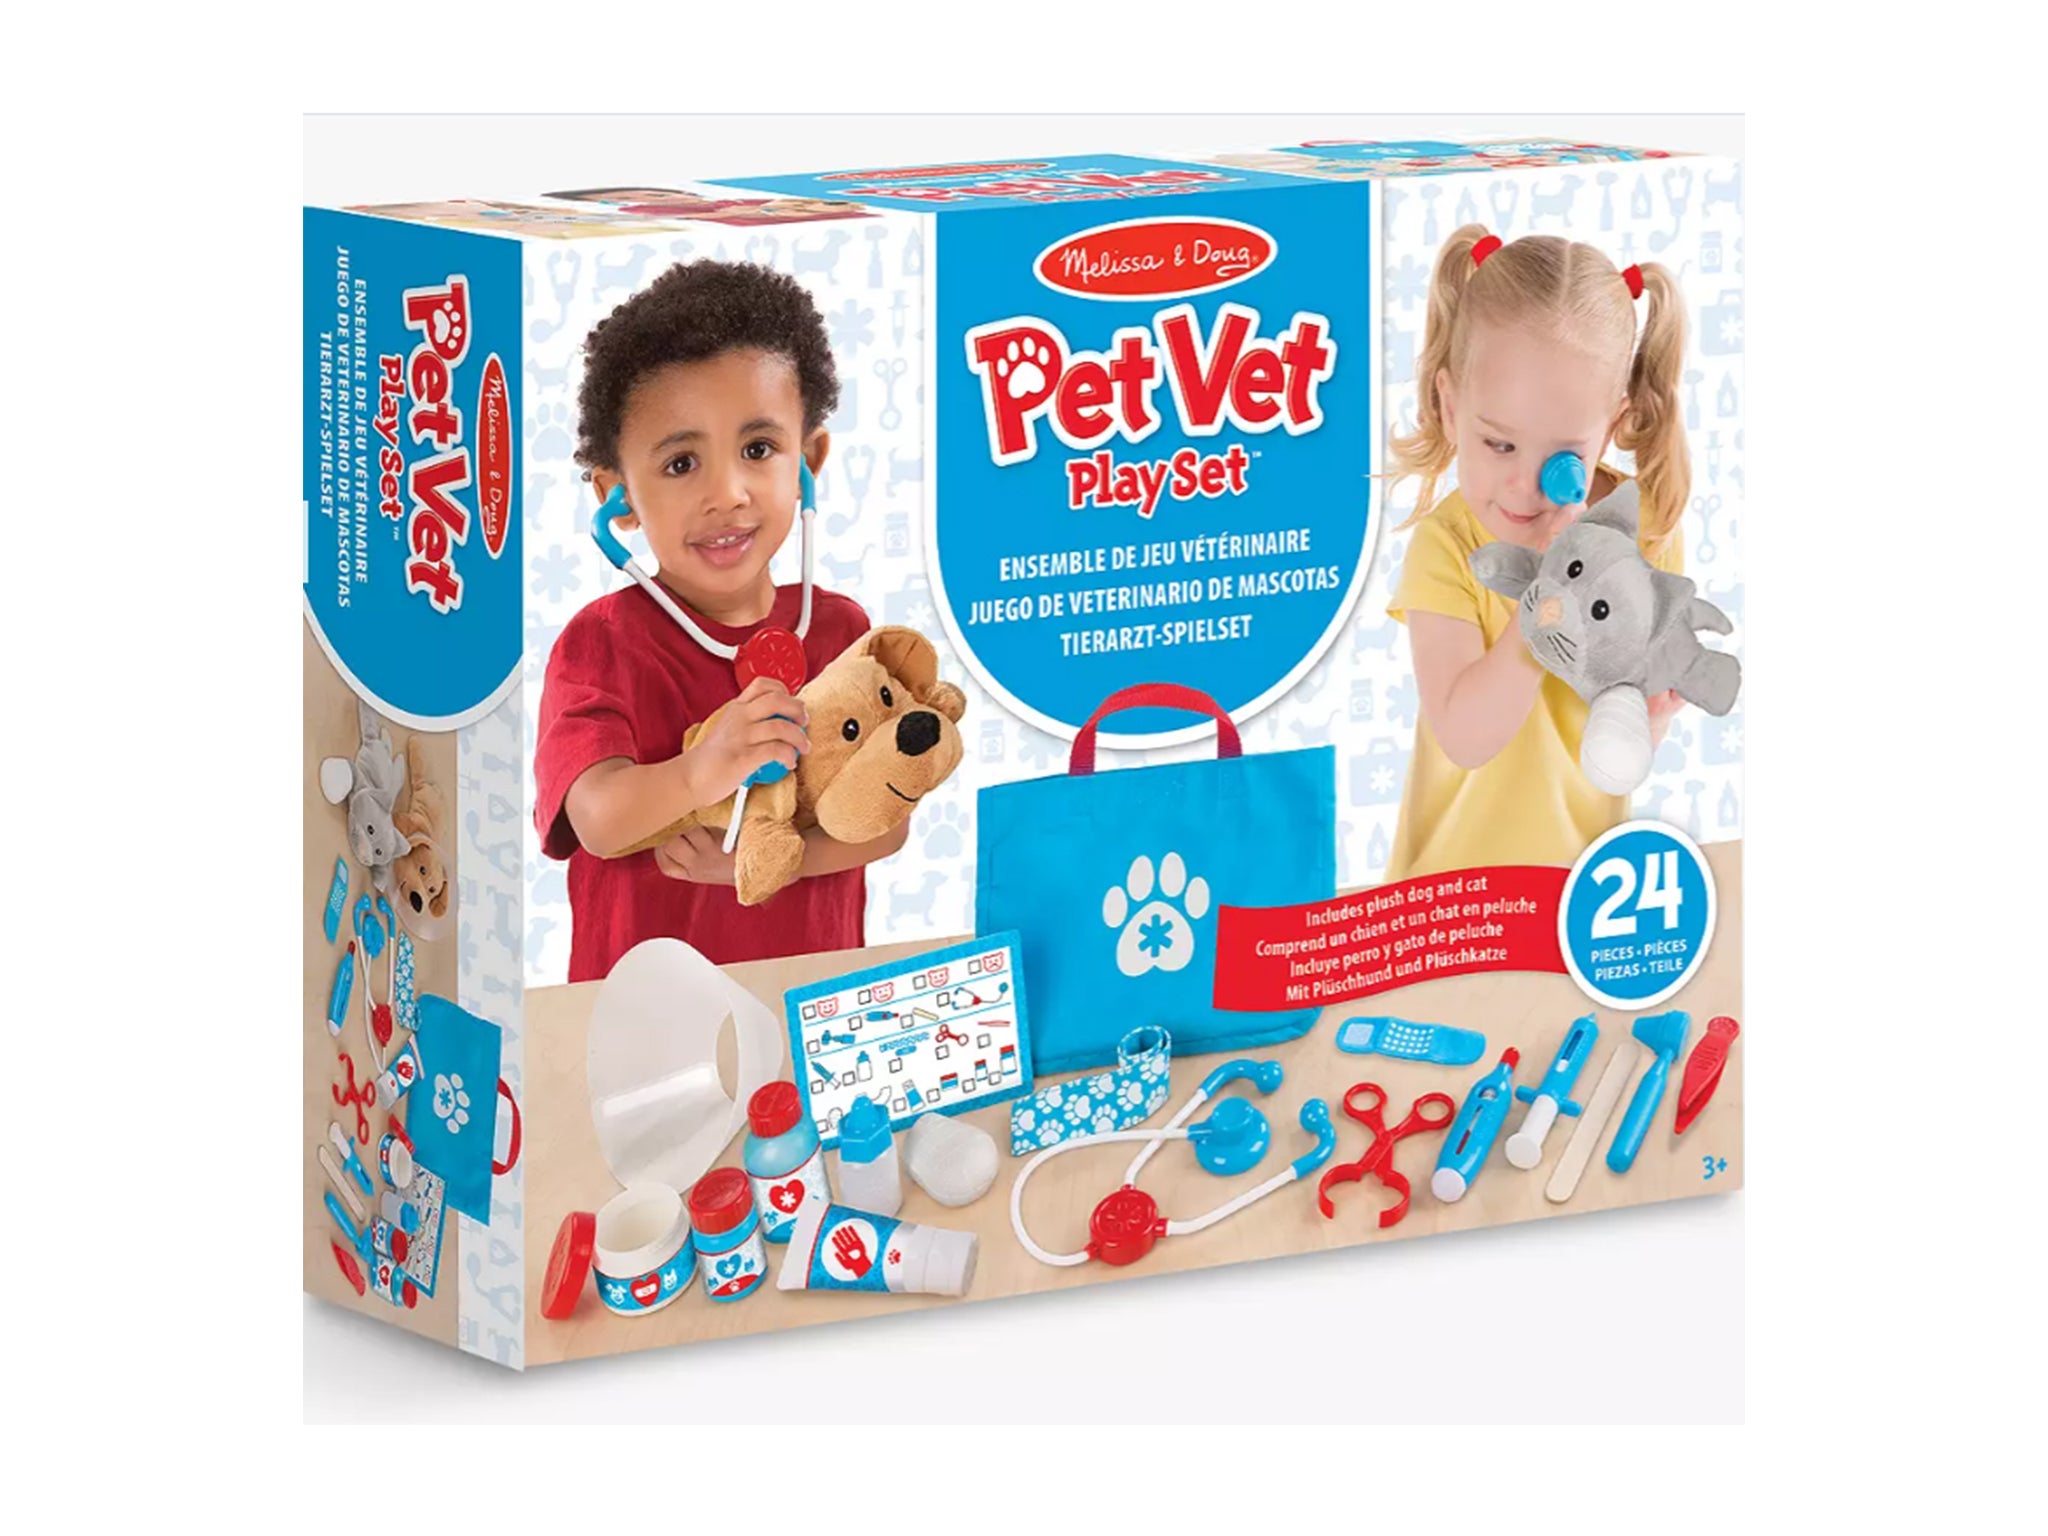 Your child can nurse any pet back to health with this comprehensive vet set&nbsp;